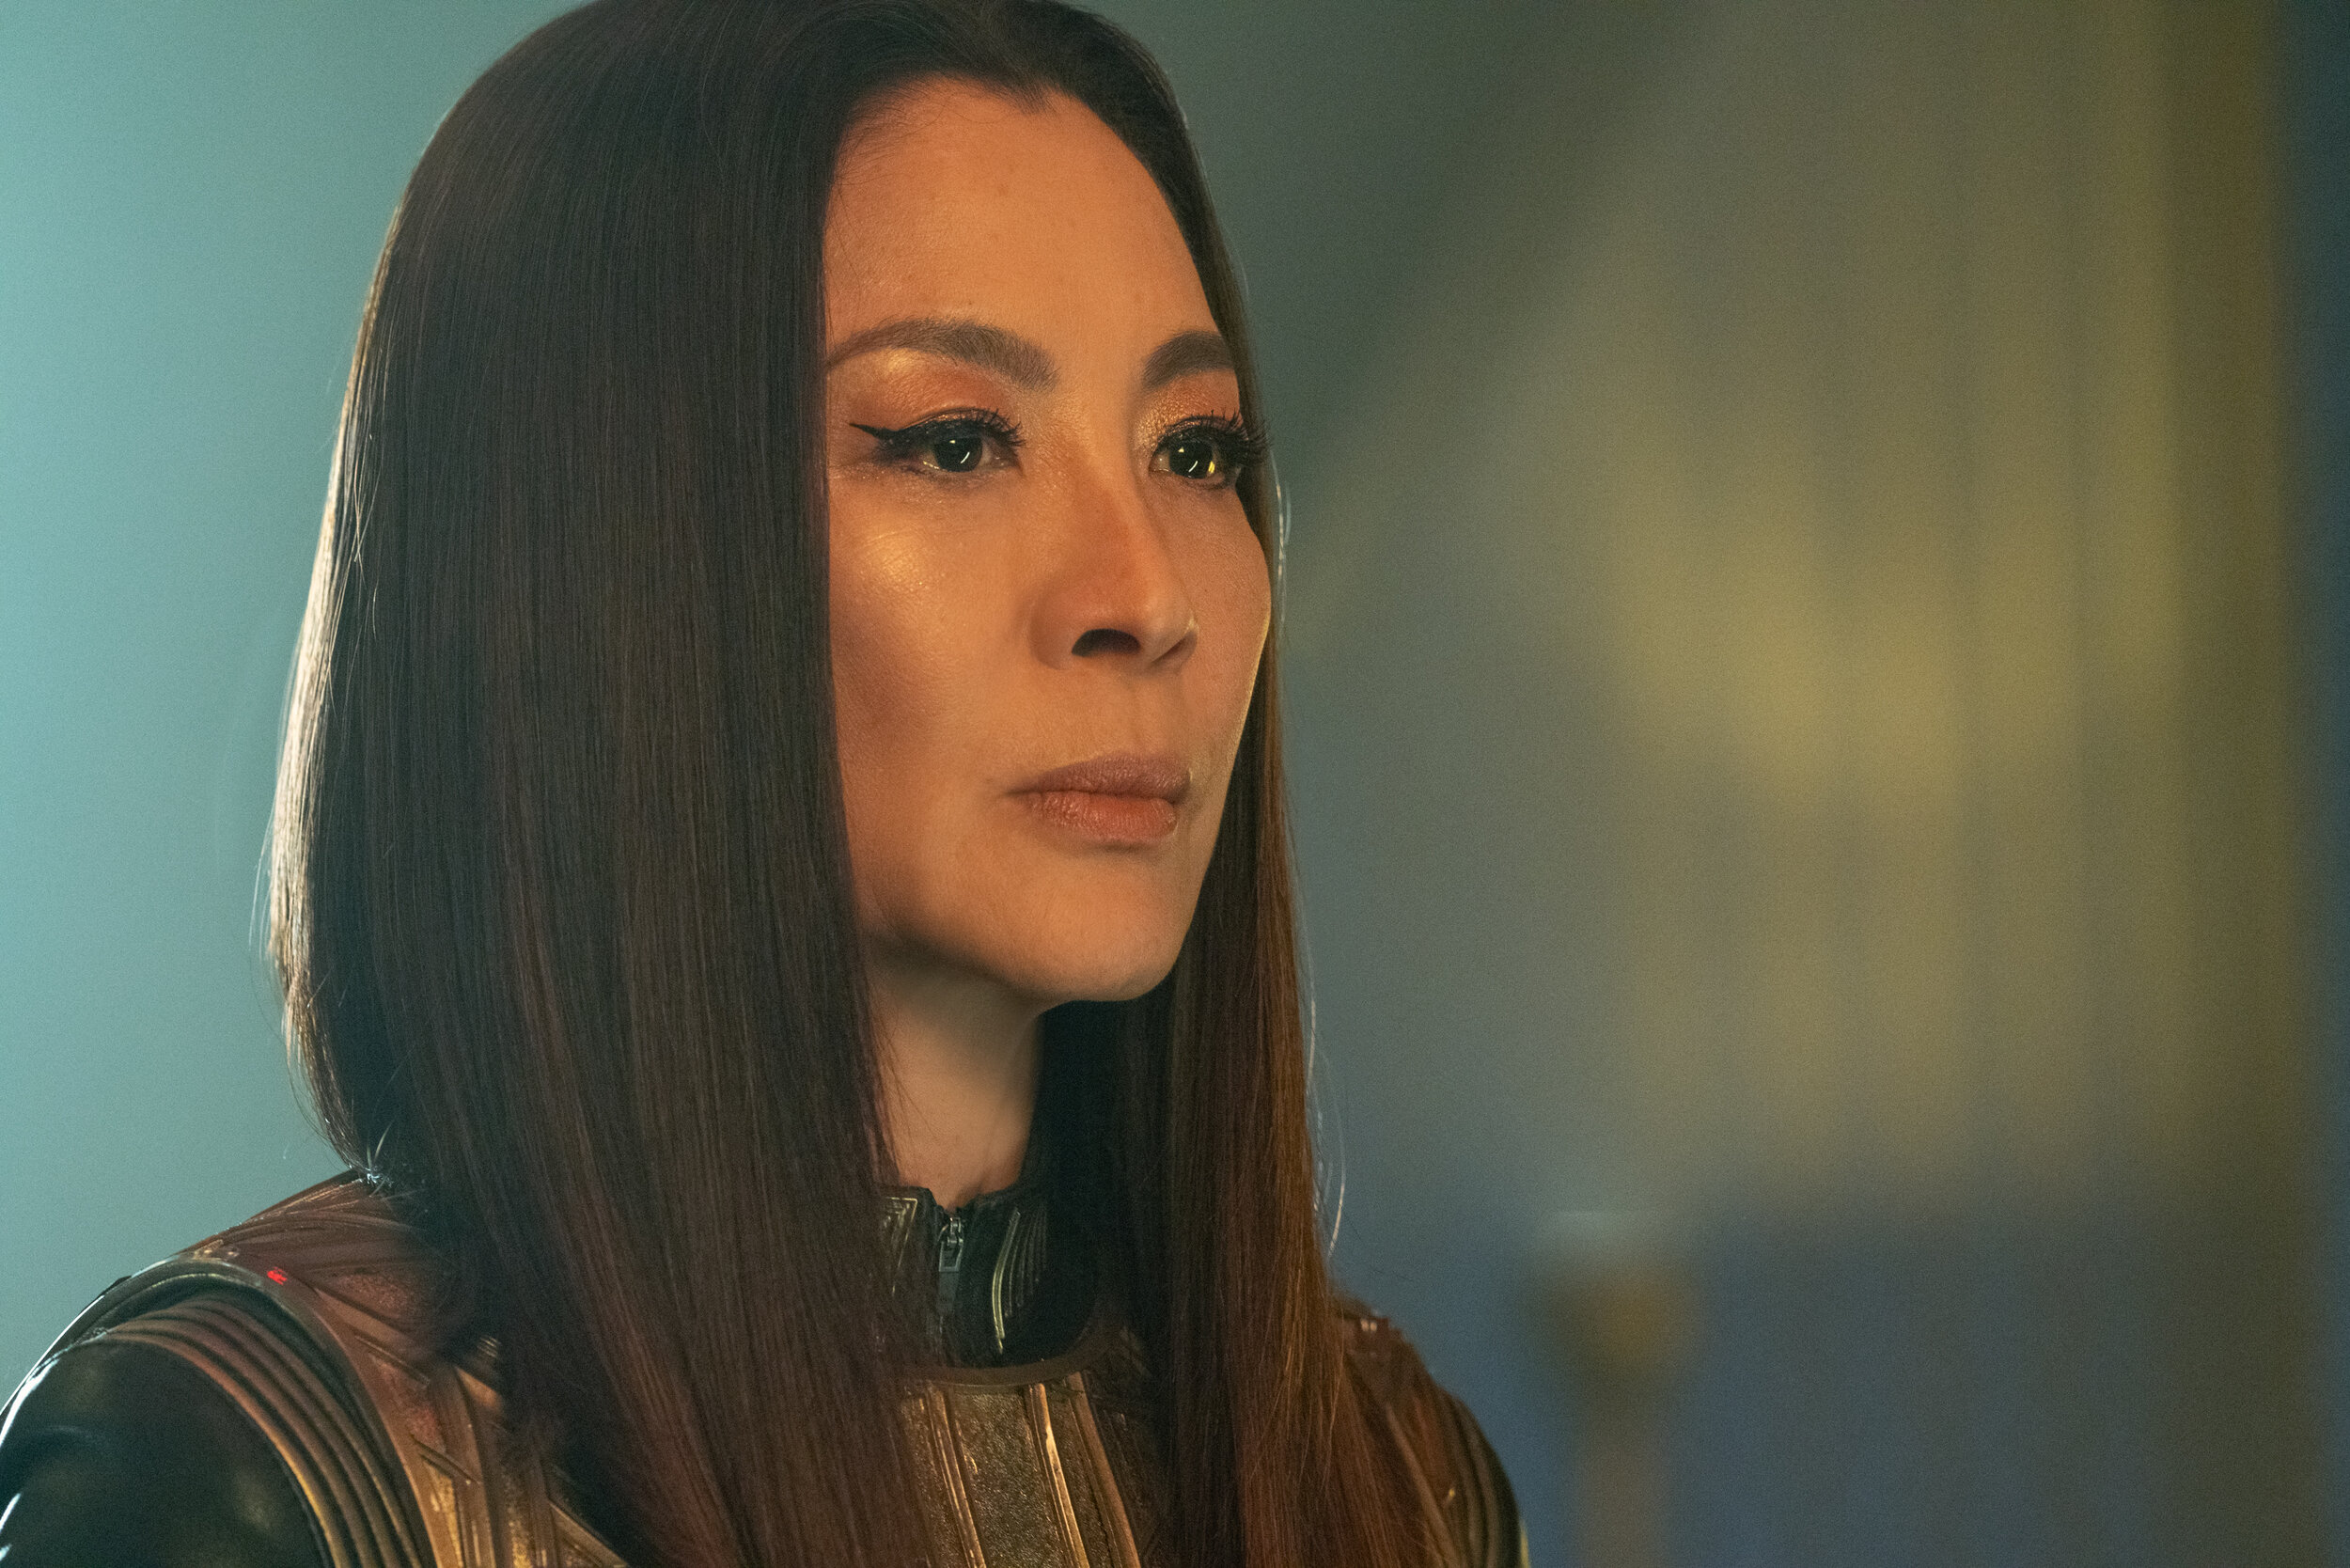   "Terra Firma, Part 2" -- Ep#310 -- Pictured: Michelle Yeoh as Georgiou of the CBS All Access series STAR TREK: DISCOVERY. Photo Cr: Michael Gibson/CBS ©2020 CBS Interactive, Inc. All Rights Reserved.  